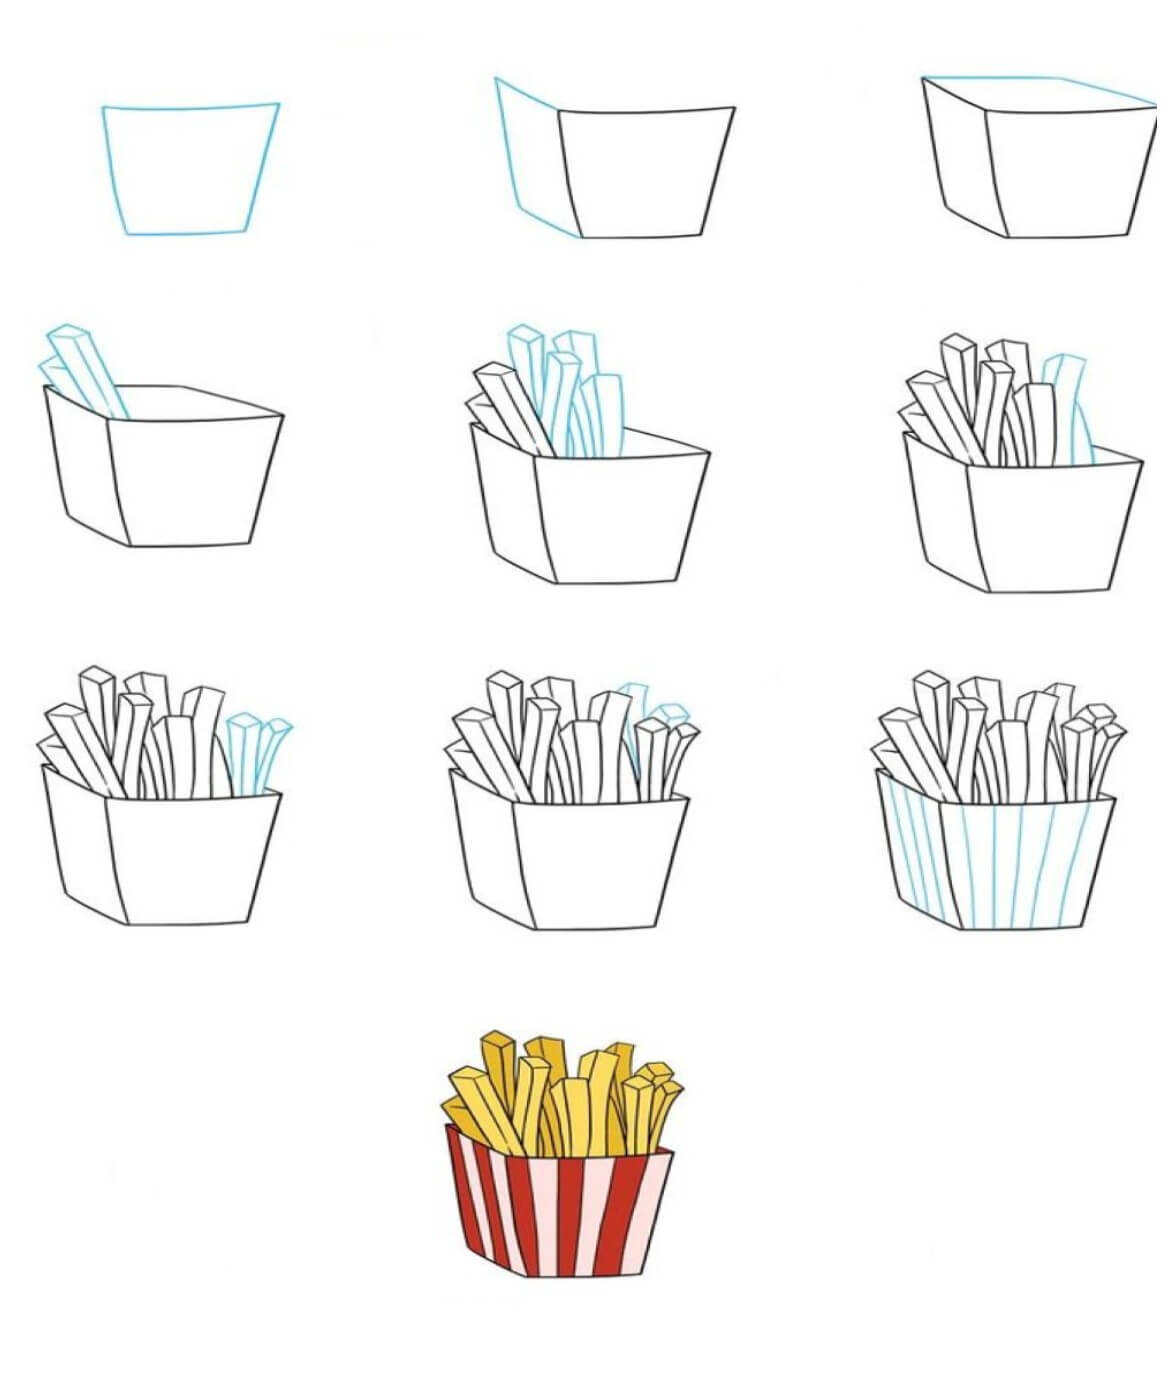 French fries (4) Drawing Ideas